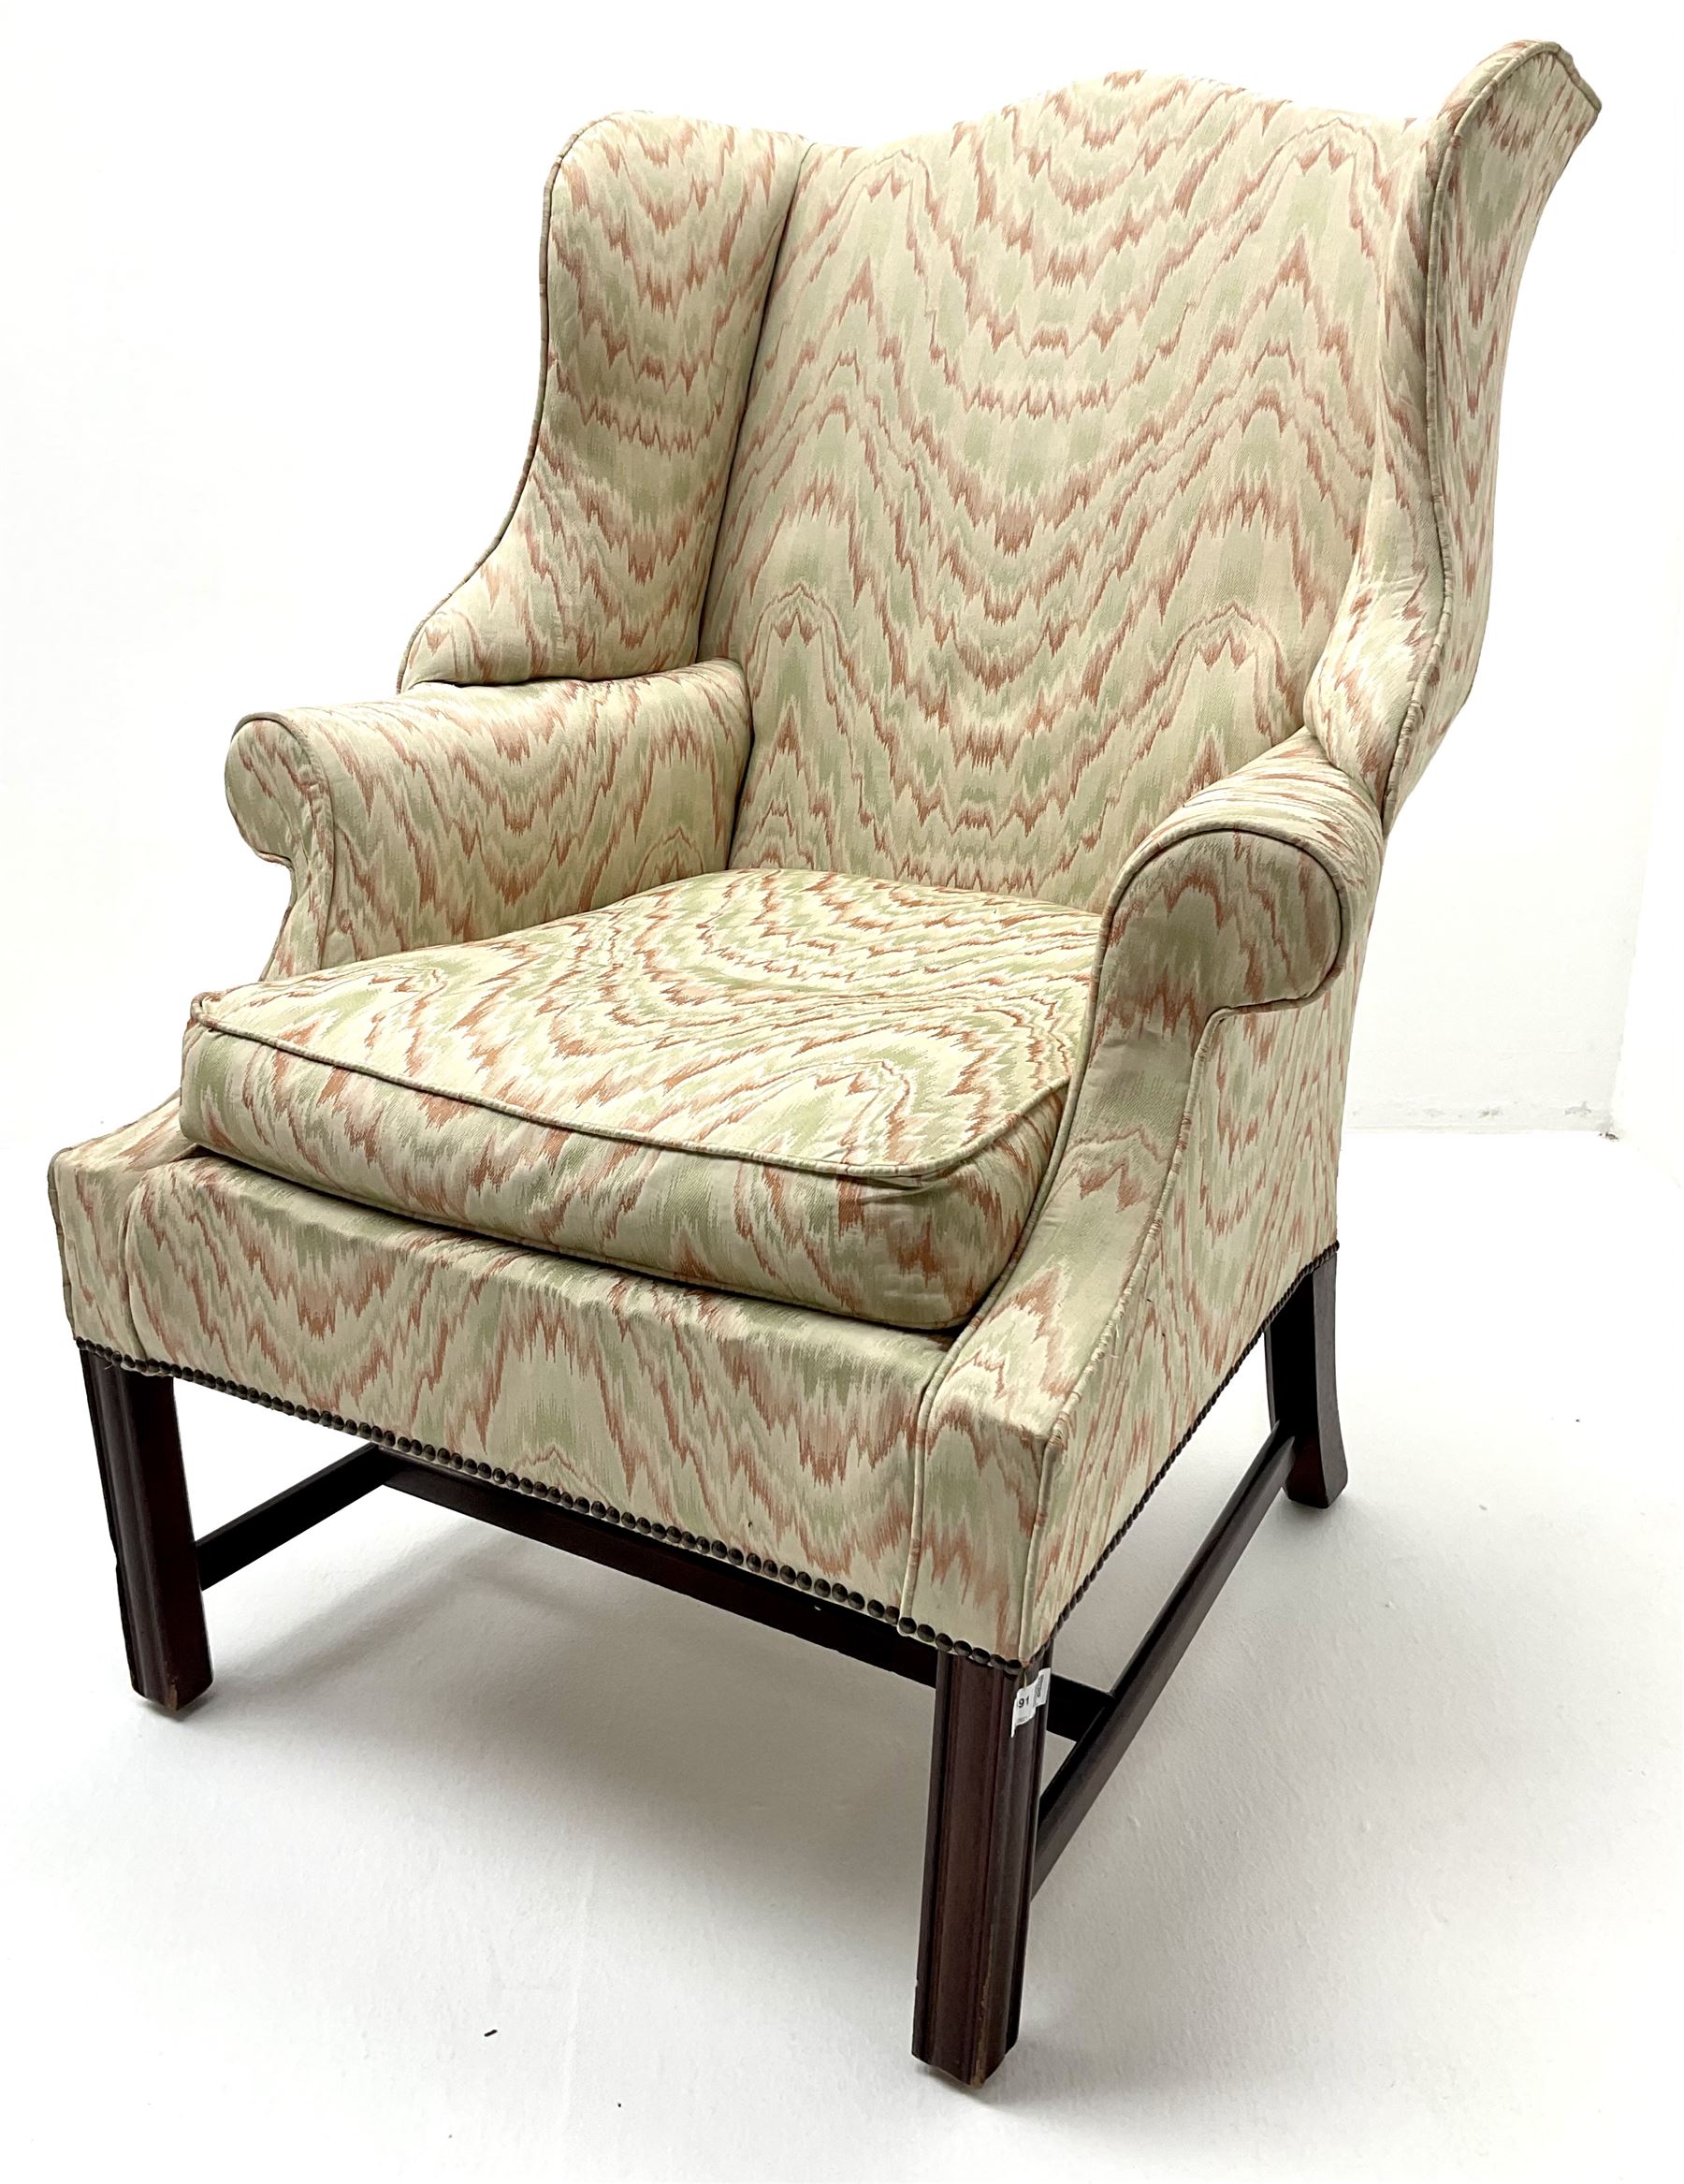 Georgian style mahogany framed wingback armchair upholstered in a beige ground fabric